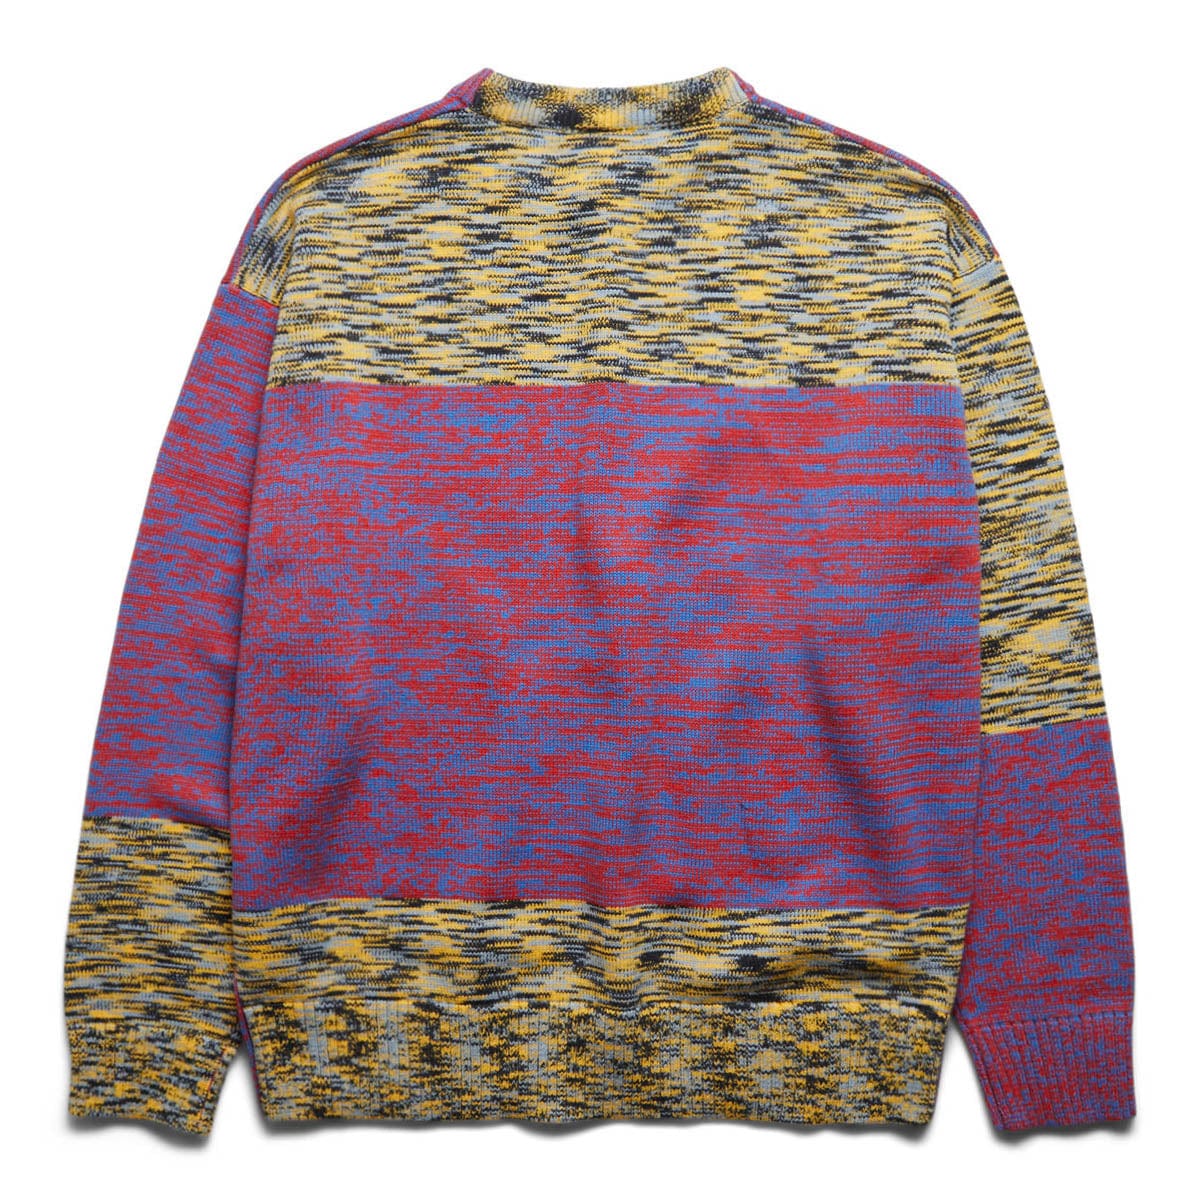 Perks and Mini Knitwear CONTACT SPACE DYE KNITTED CREW NECK